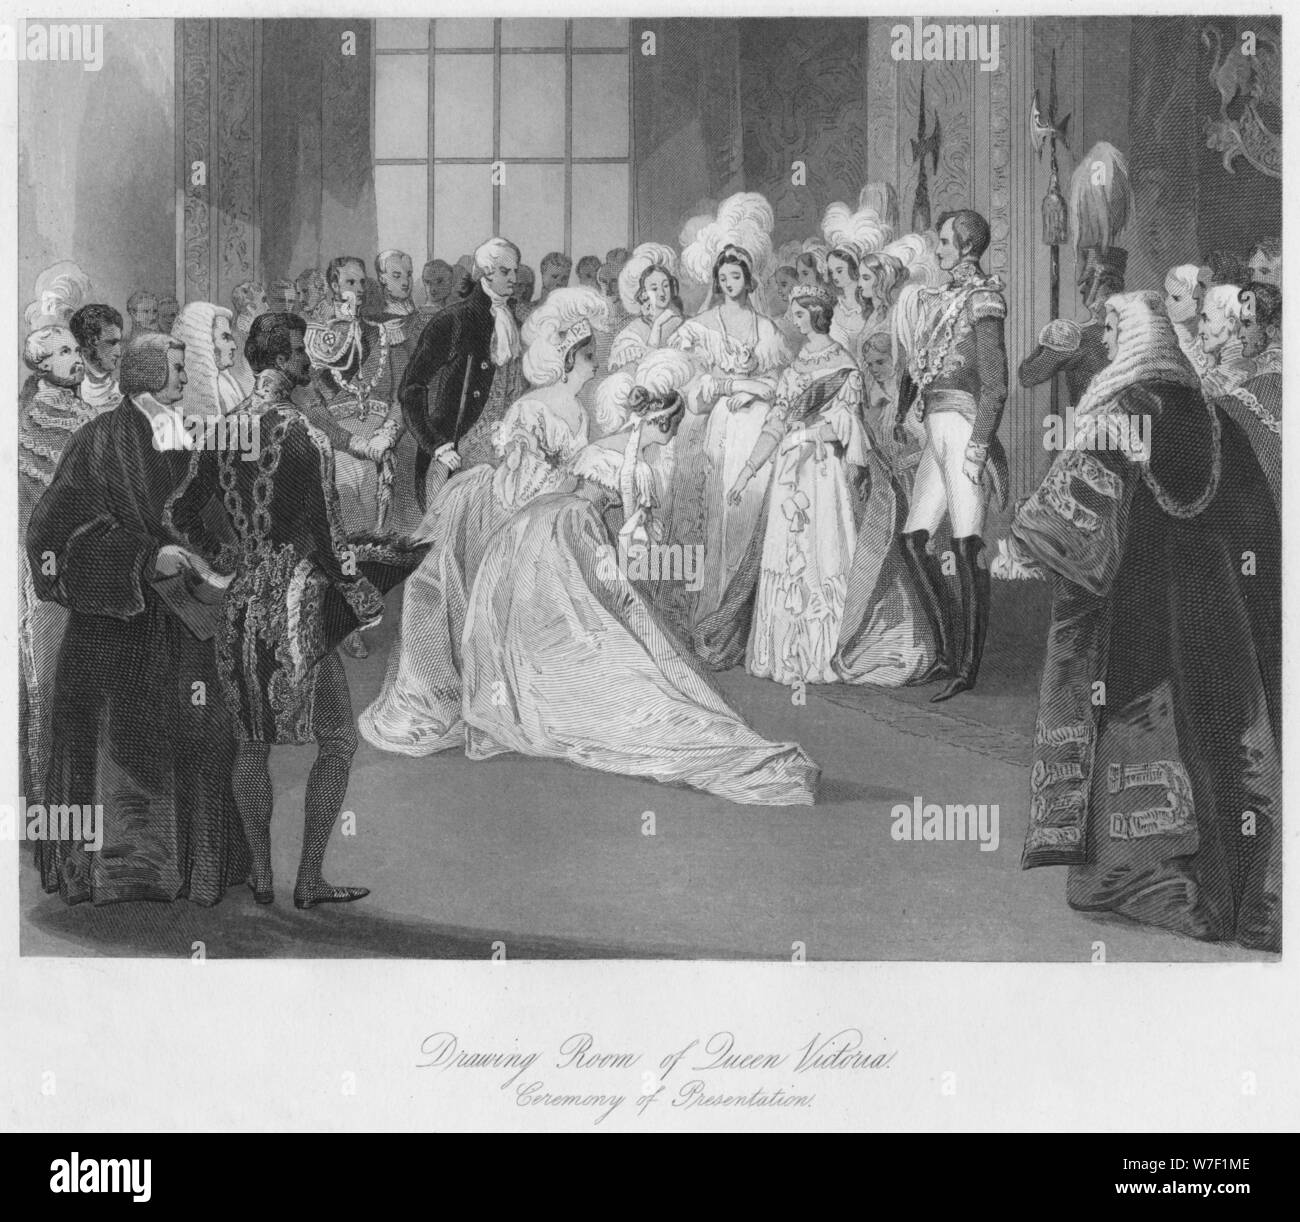 'Drawing Room of Queen Victoria. Ceremony of Presentation', c1841. Artist: Henry Melville. Stock Photo